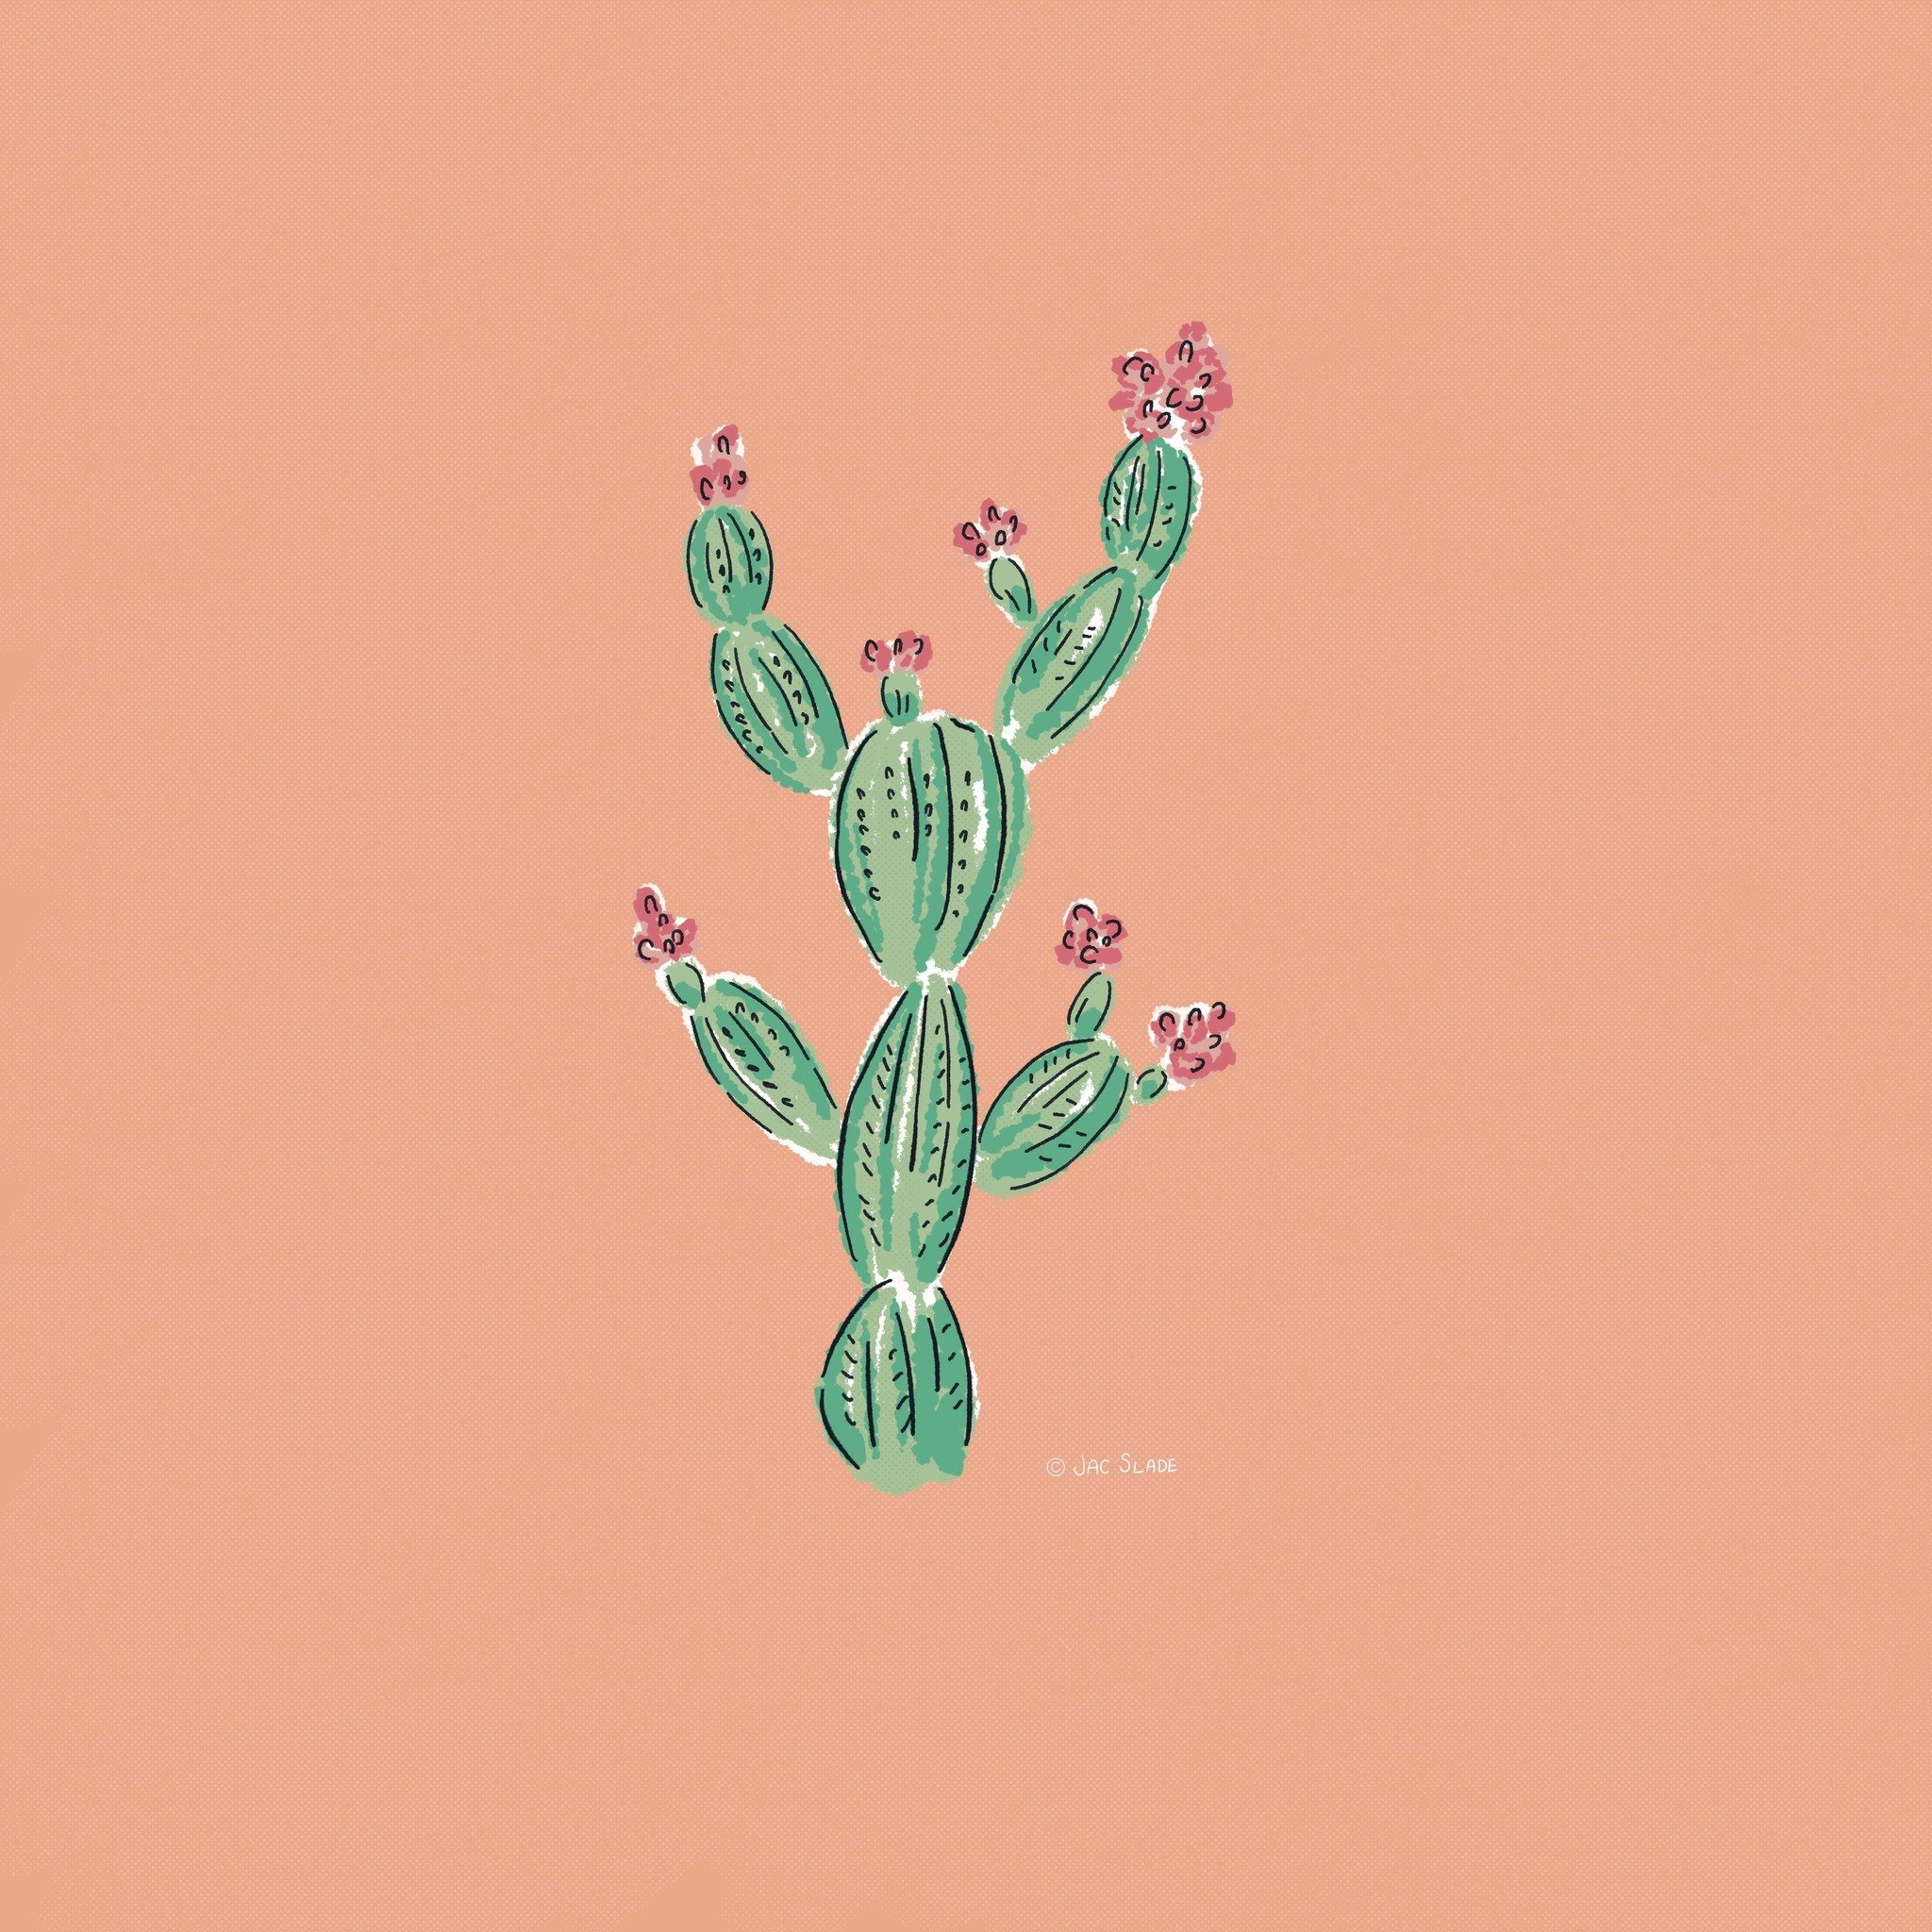 Desert Cactus...
🌵🌸🌵🌸
I'm getting my sketchbook ideas out of my art journal and recreating them on my iPad in Procreate. 
What do you think, do you like seeing the illustrations that make up my pattern designs?

#jacslade #artlicensing #SurfaceDe